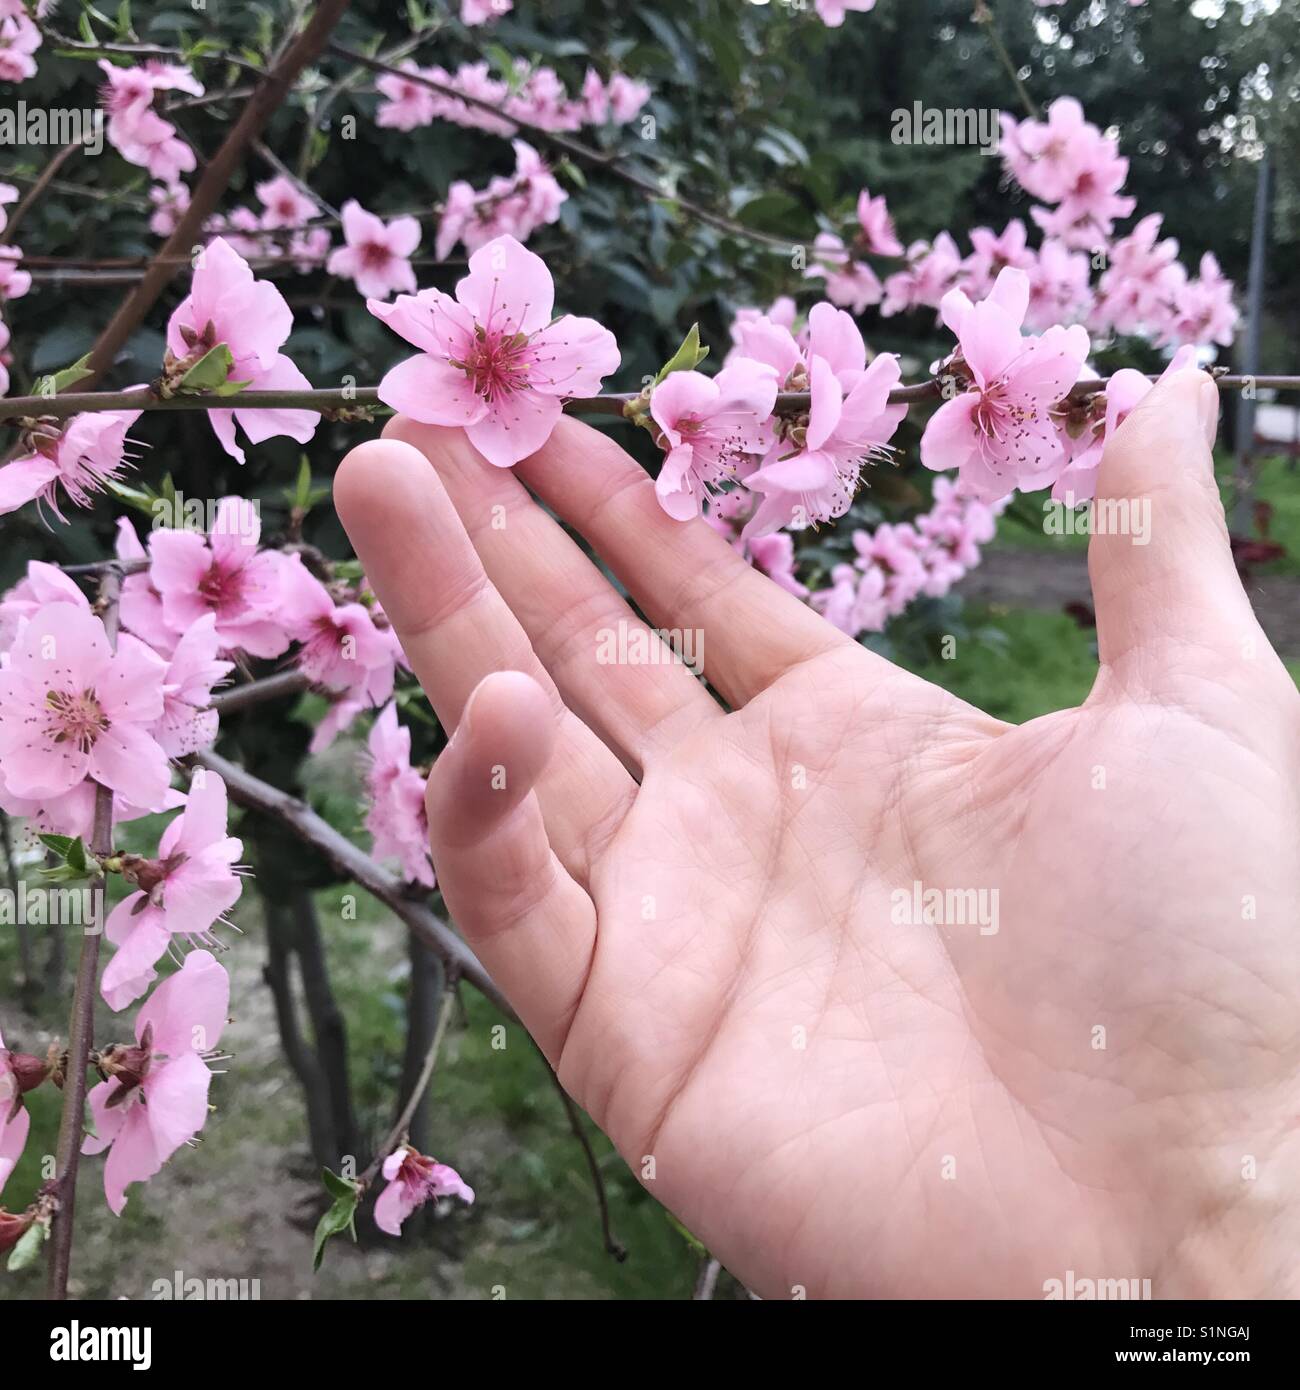 Man's hand caressing a tiny flower. Stock Photo